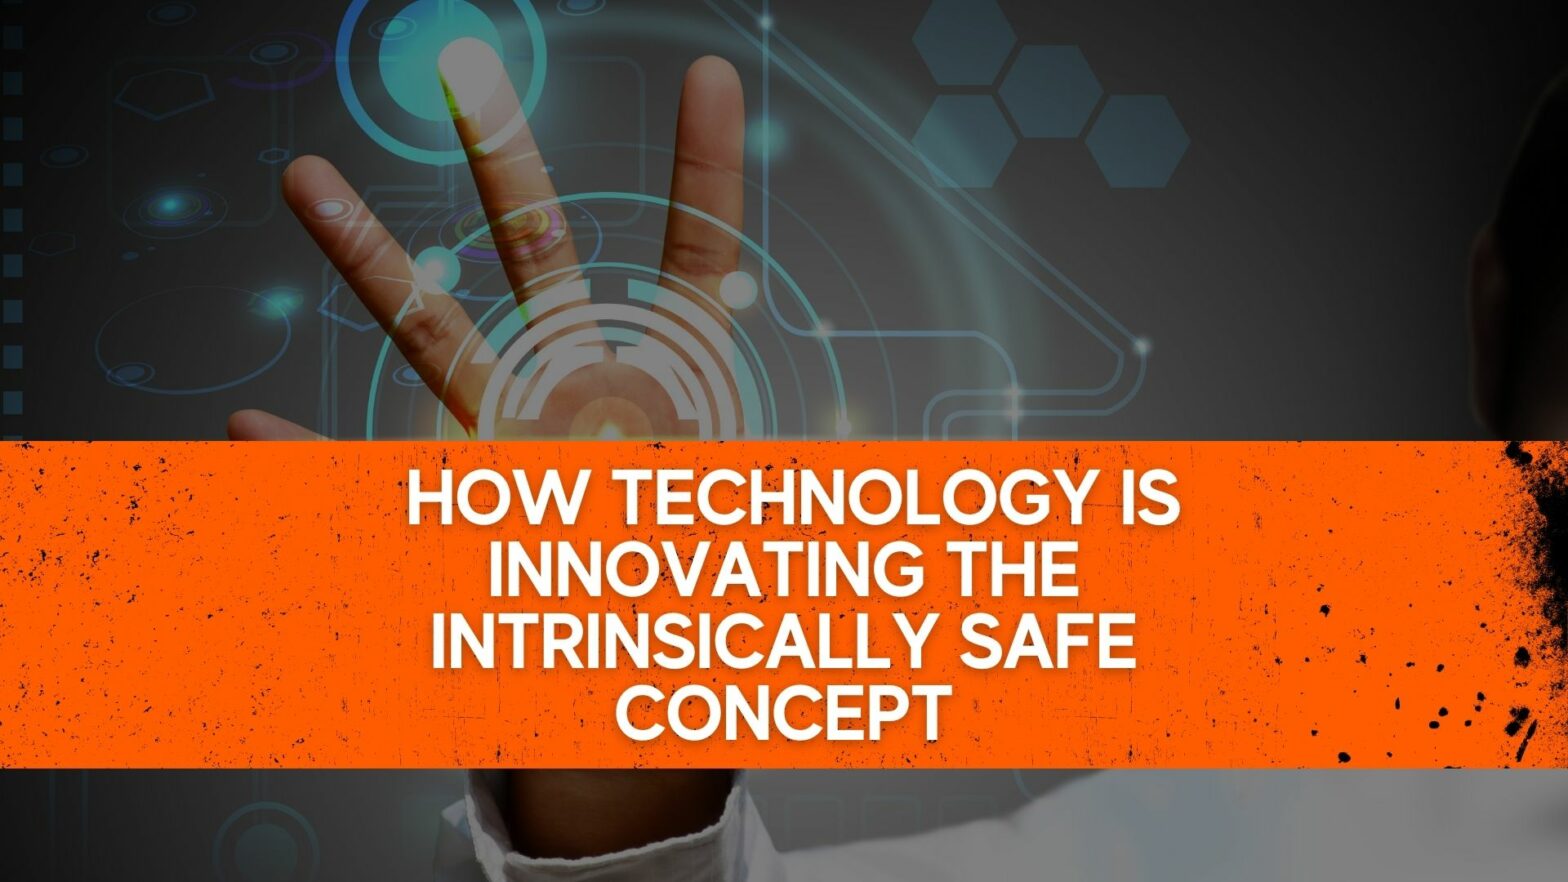 How technology is innovating the intrinsically safe concept